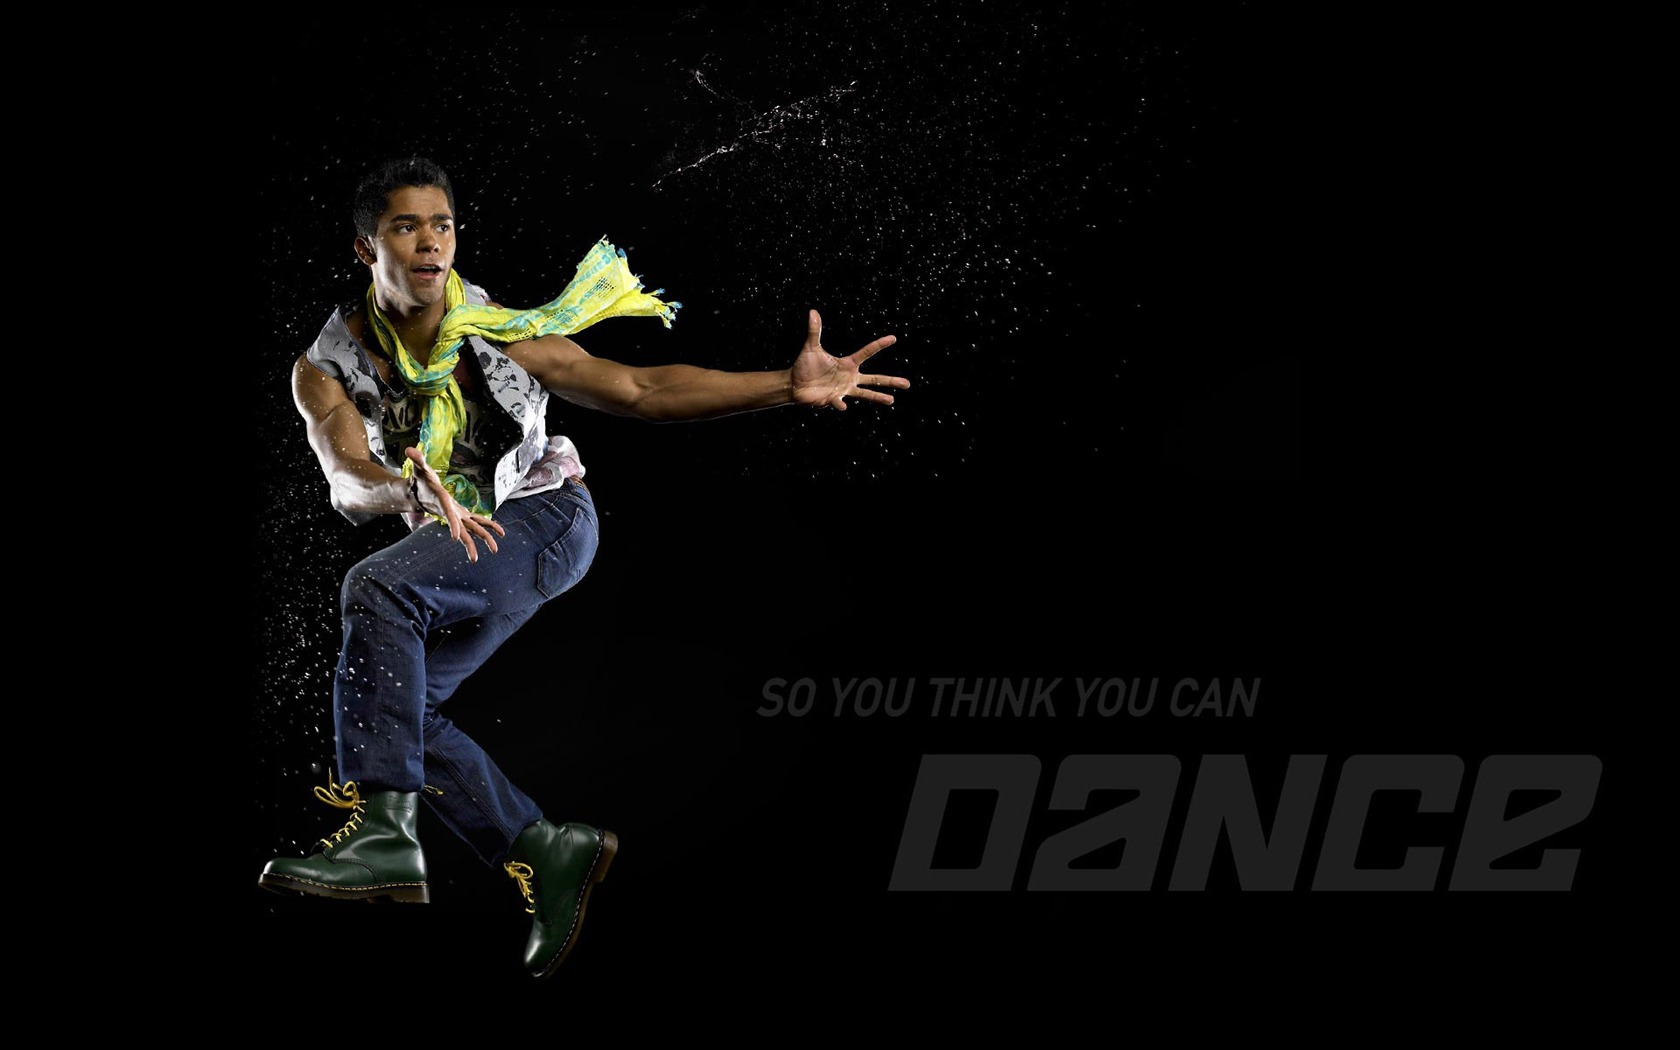 So You Think You Can Dance wallpaper (1) #2 - 1680x1050